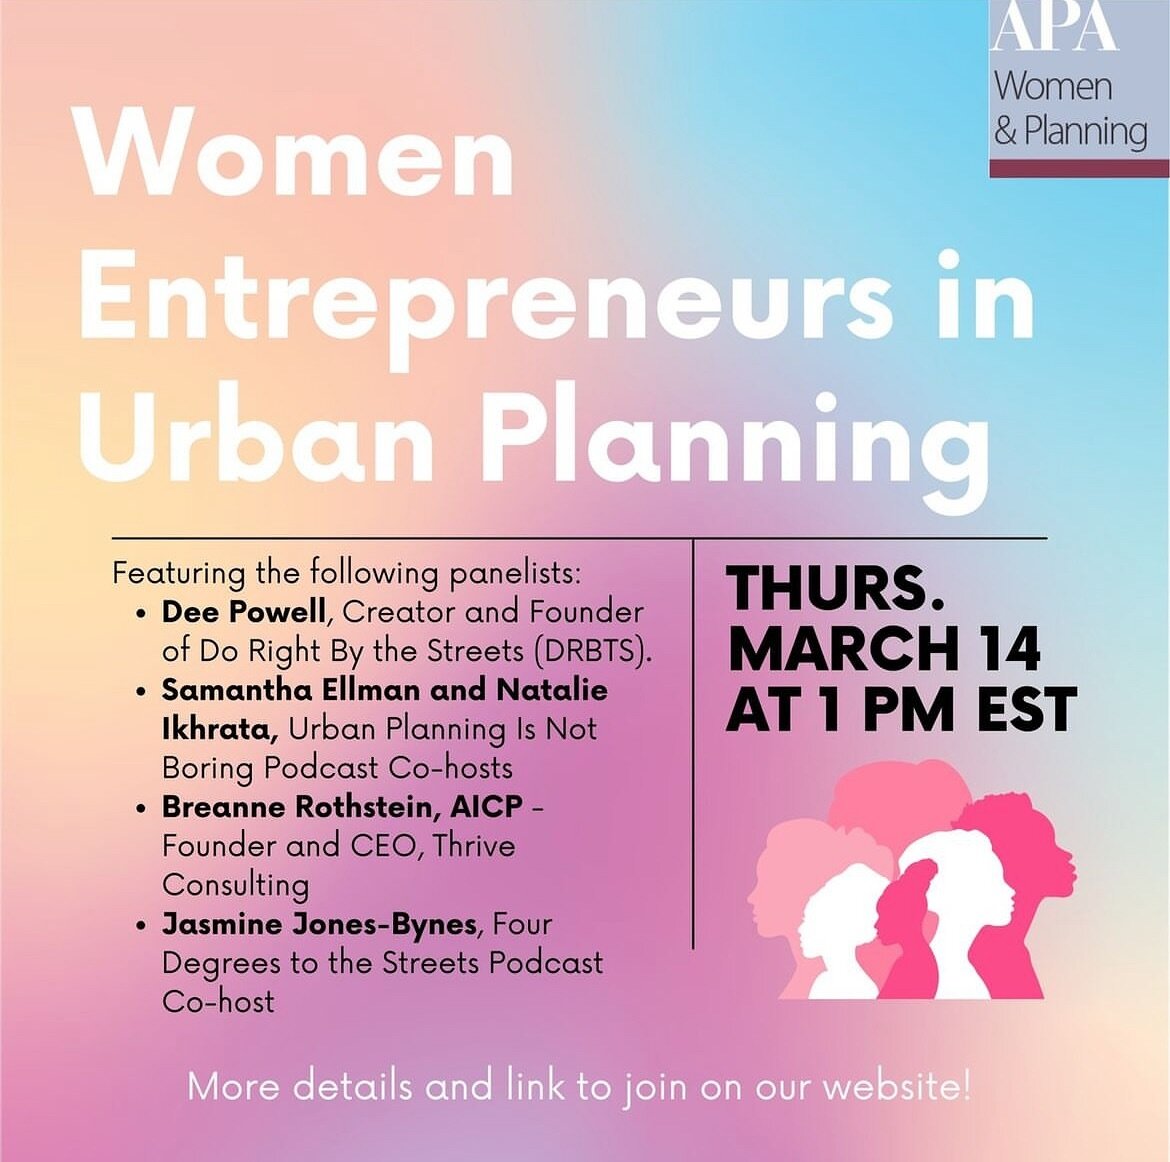 So excited to be part of this amazing panel TOMORROW through APA WPD!!! Sign up at @women.apa link in bio!!!! 

Women take different career paths in urban planning. While having equal skills to start a business, men heavily outnumber women in entrepr